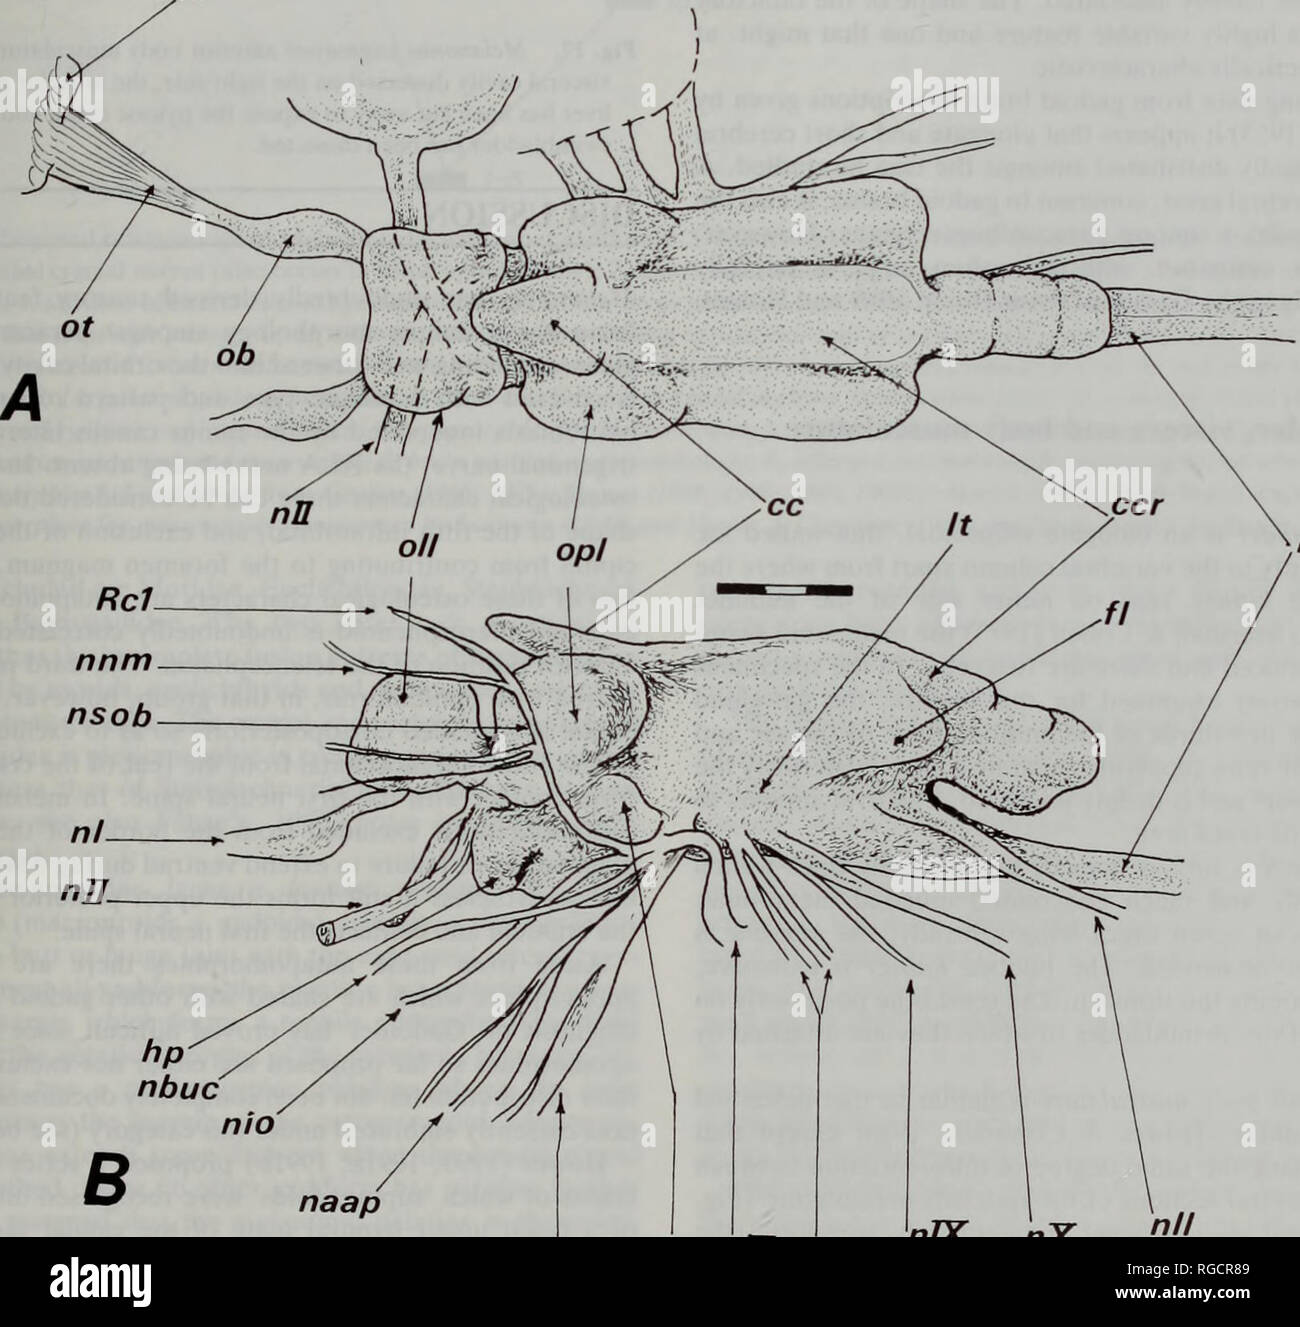 . Bulletin of the Natural History Museum Zoology. ANATOMY OF THE MELANONIDAE 27 first to the tenth. In batrachoidiiforms it is usually between the third and fourth neural spines and in lophiiforms the eighth and ninth or more posterior neural spines. Supraneurals, preceding the first dorsal fin are rarely present in gadiforms (Patterson &amp; Rosen, 1989). Baudelot's ligament (Figs 13A,B) stems from the lateral cavity of the first vertebra to connect with the supracleithrum. The retractor dorsalis muscle originates from the fourth through sixth vertebrae; on the sixth it is attached to the lea Stock Photo